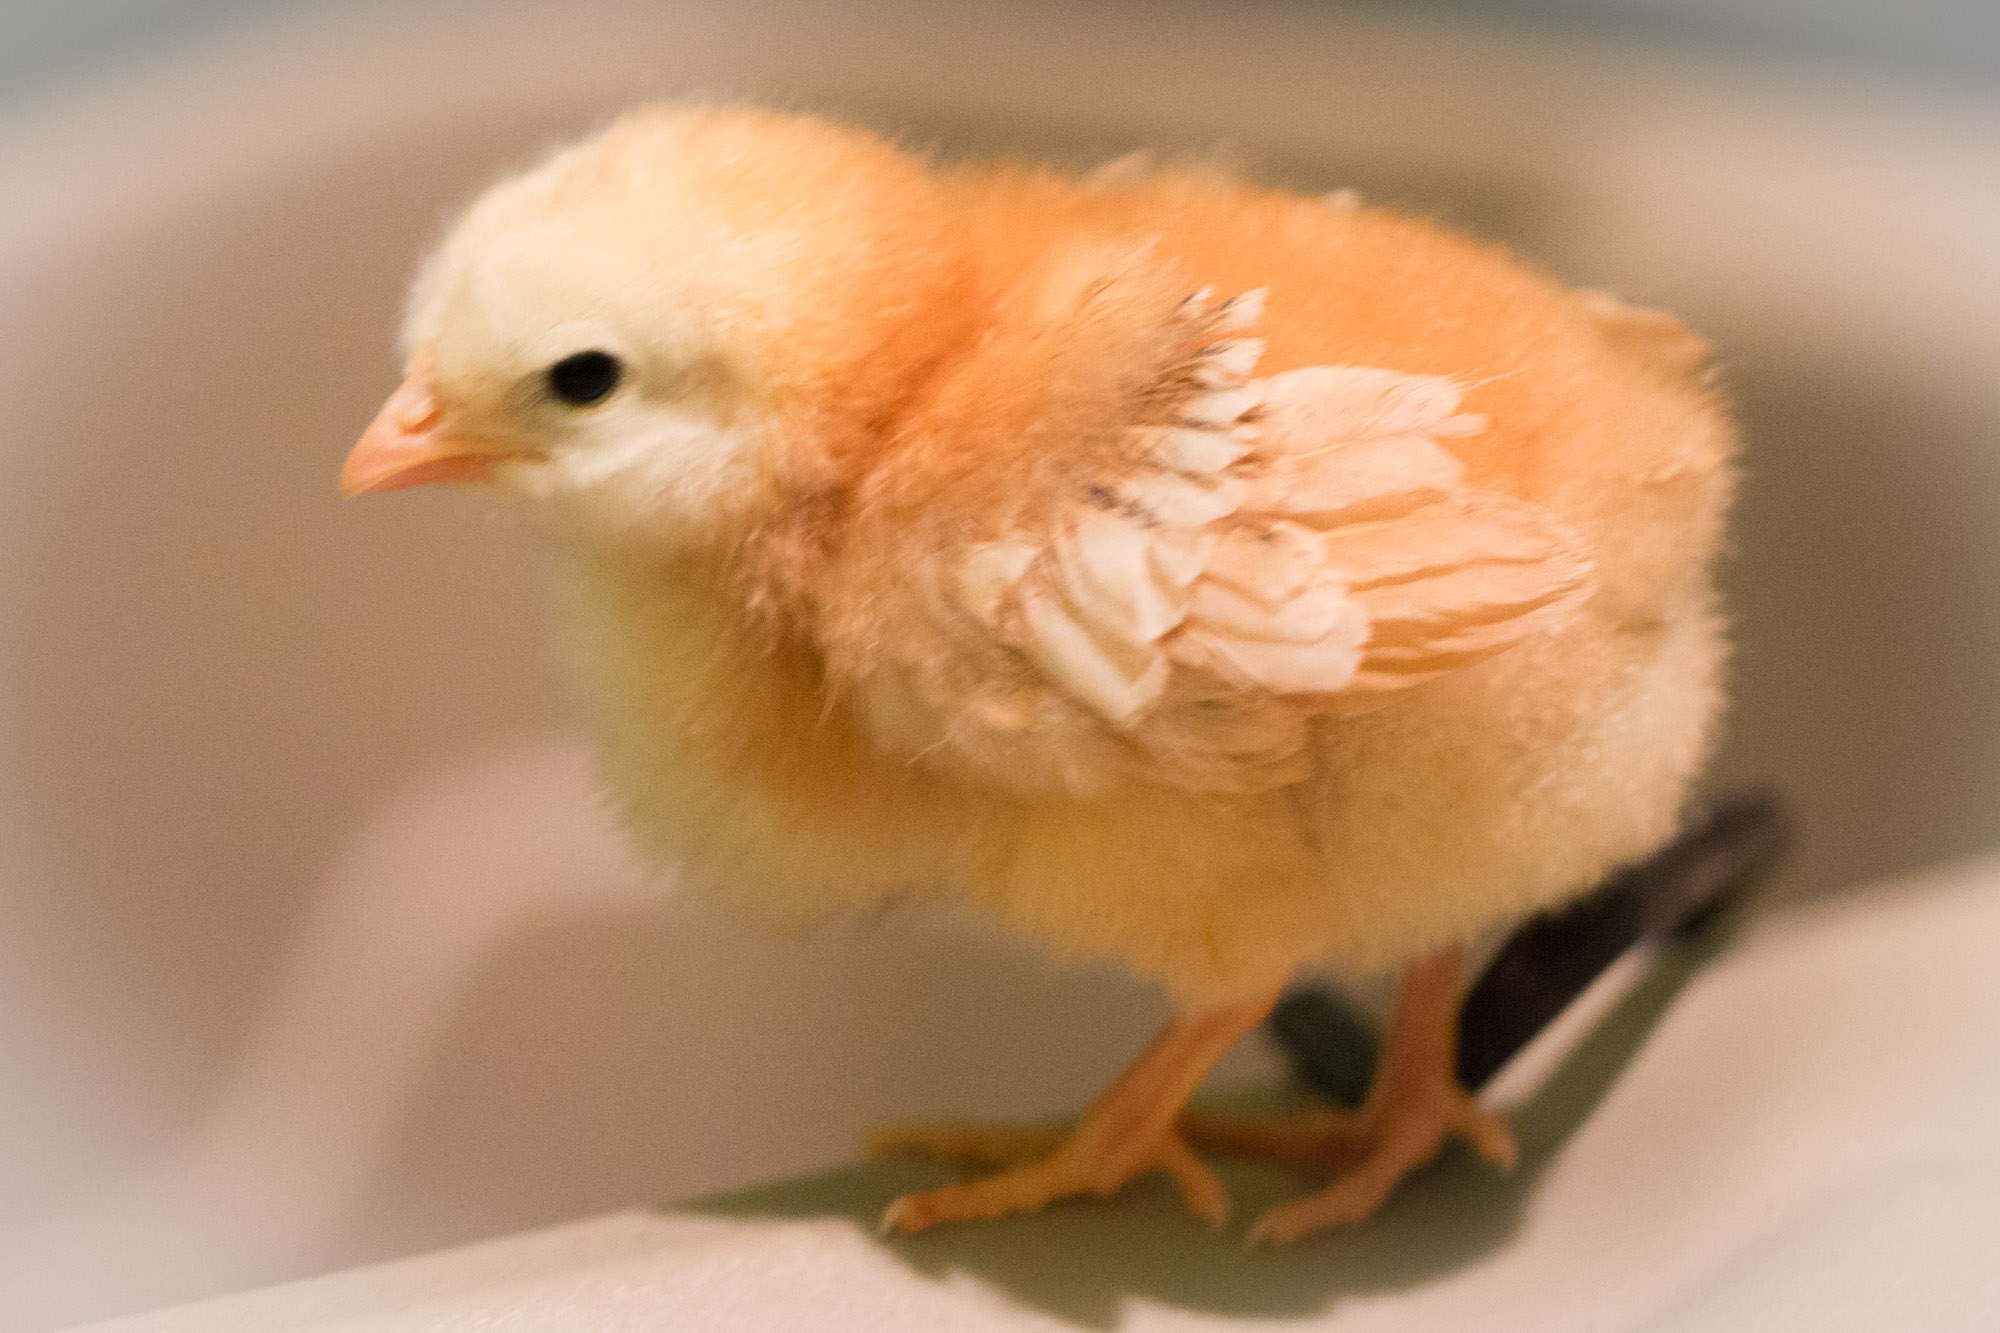 How to Care For Baby Chicks